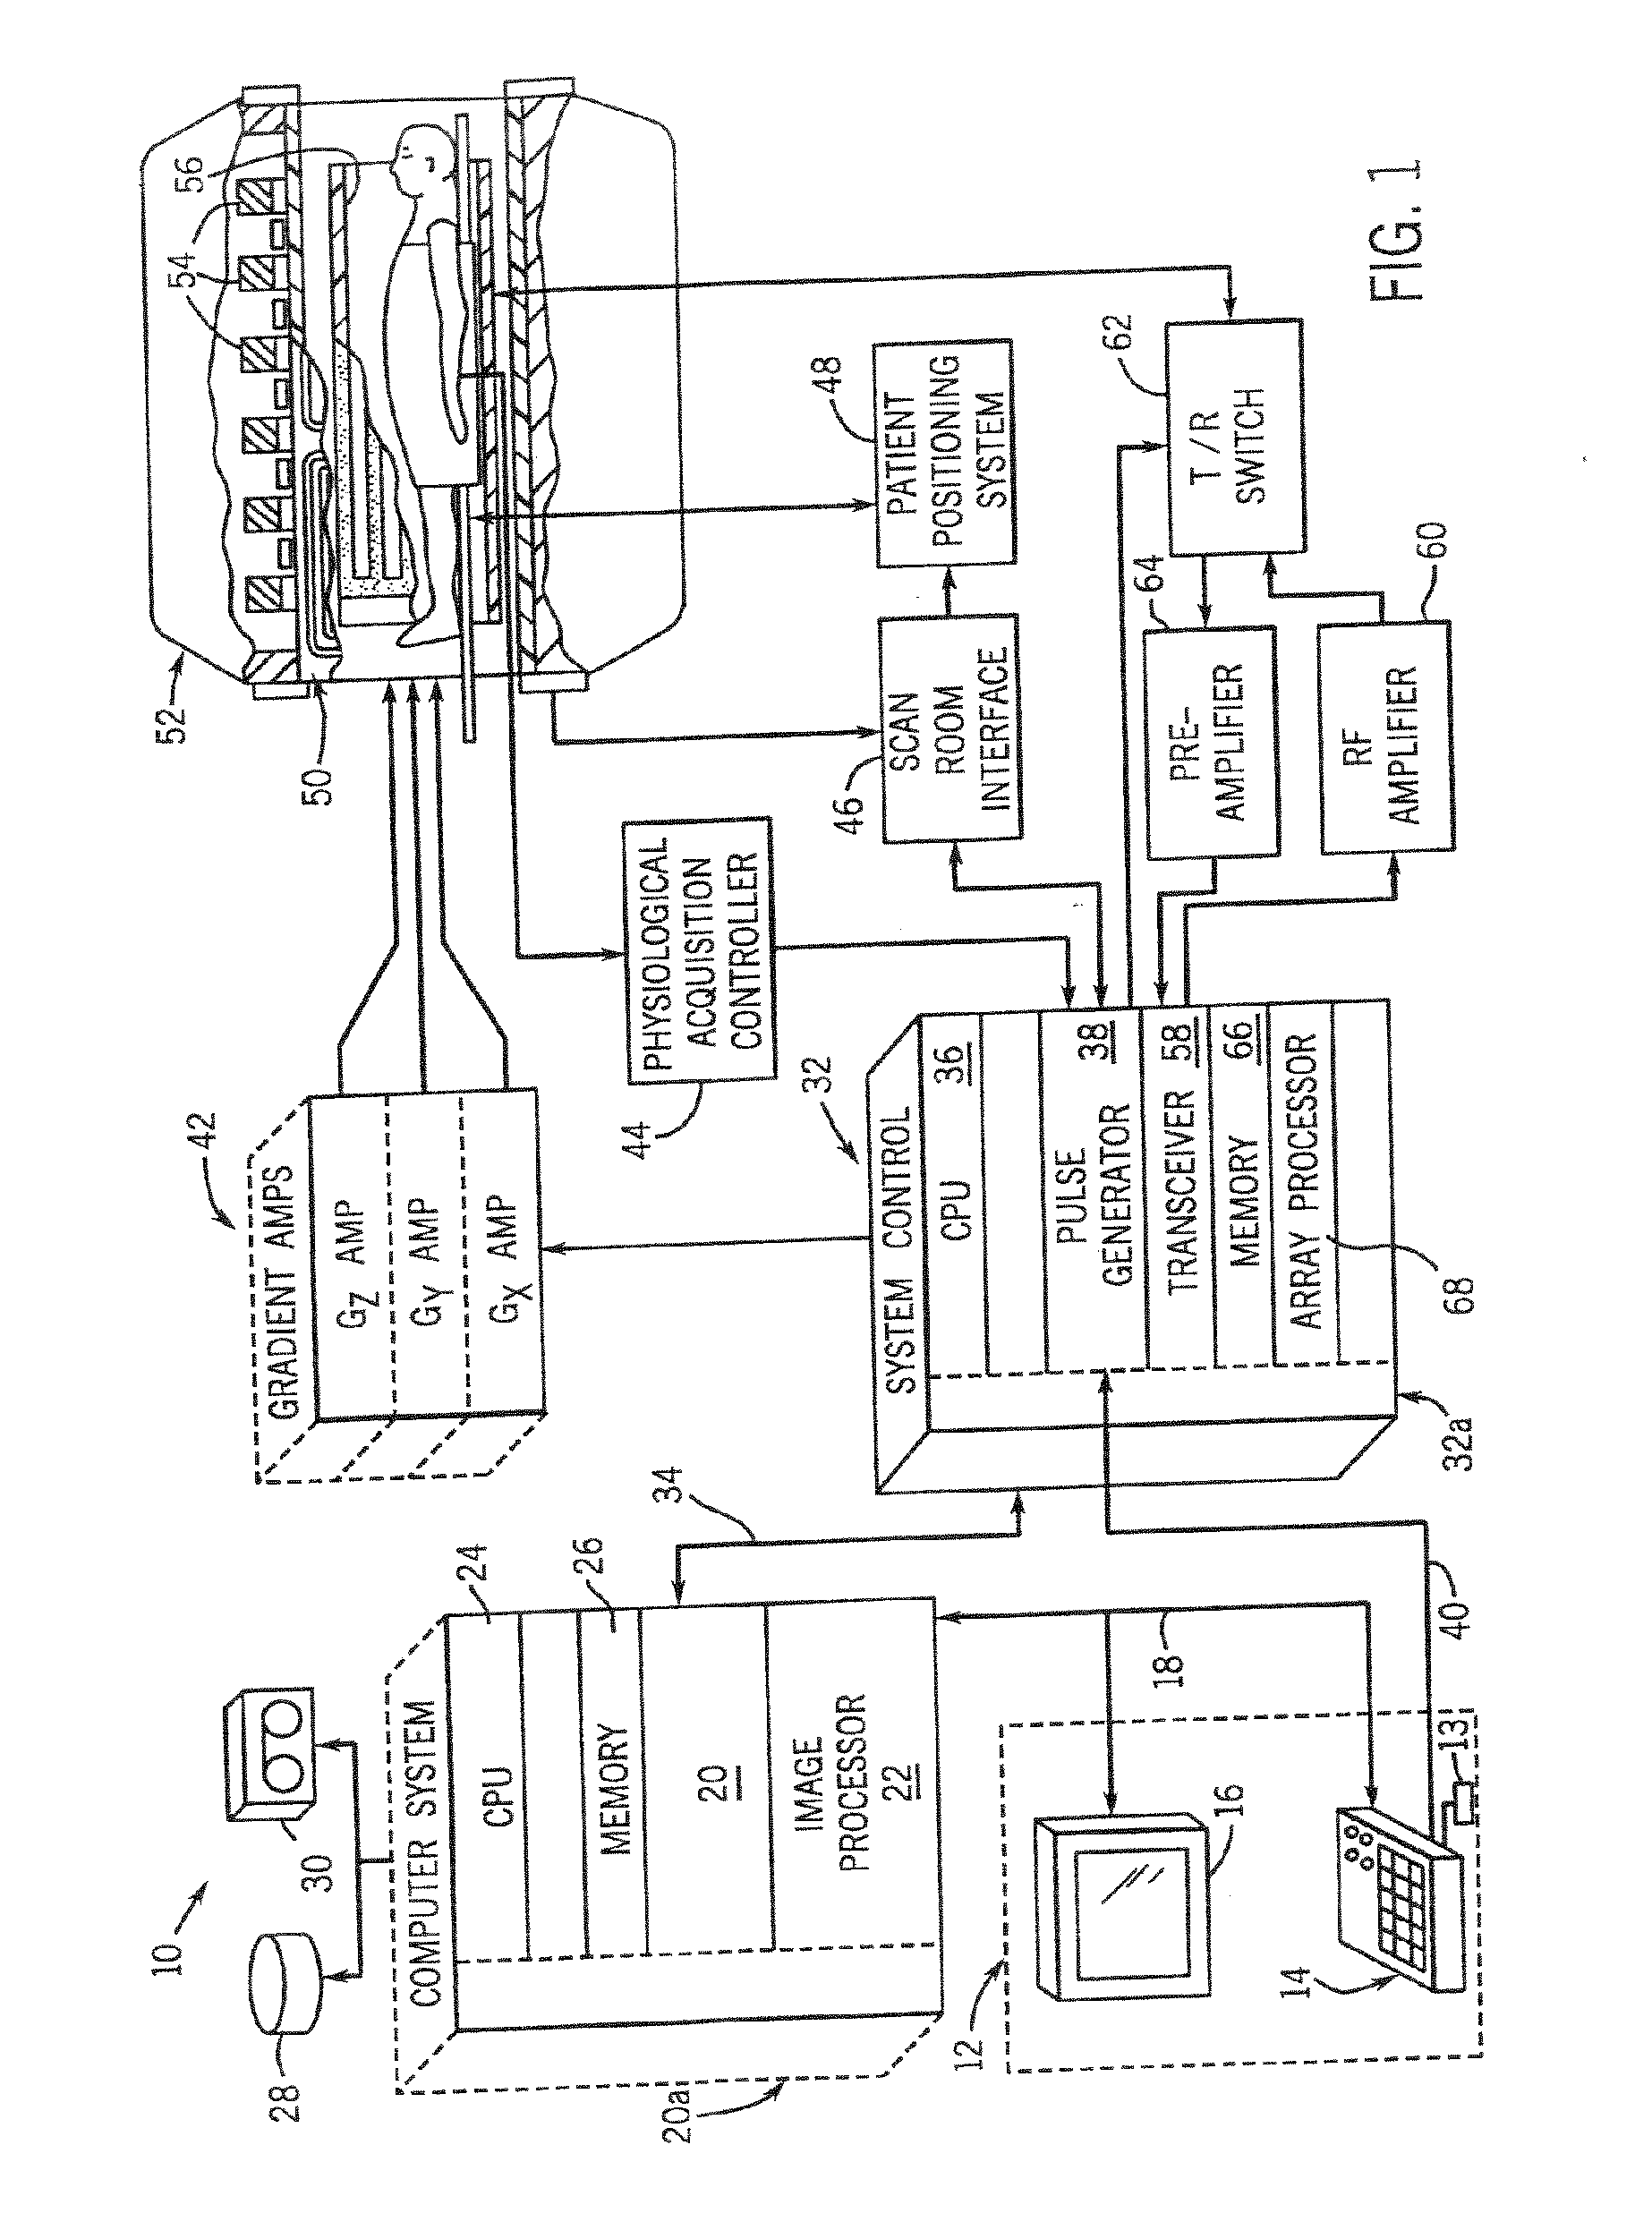 Method and apparatus of background suppression in mr imaging using spin locking